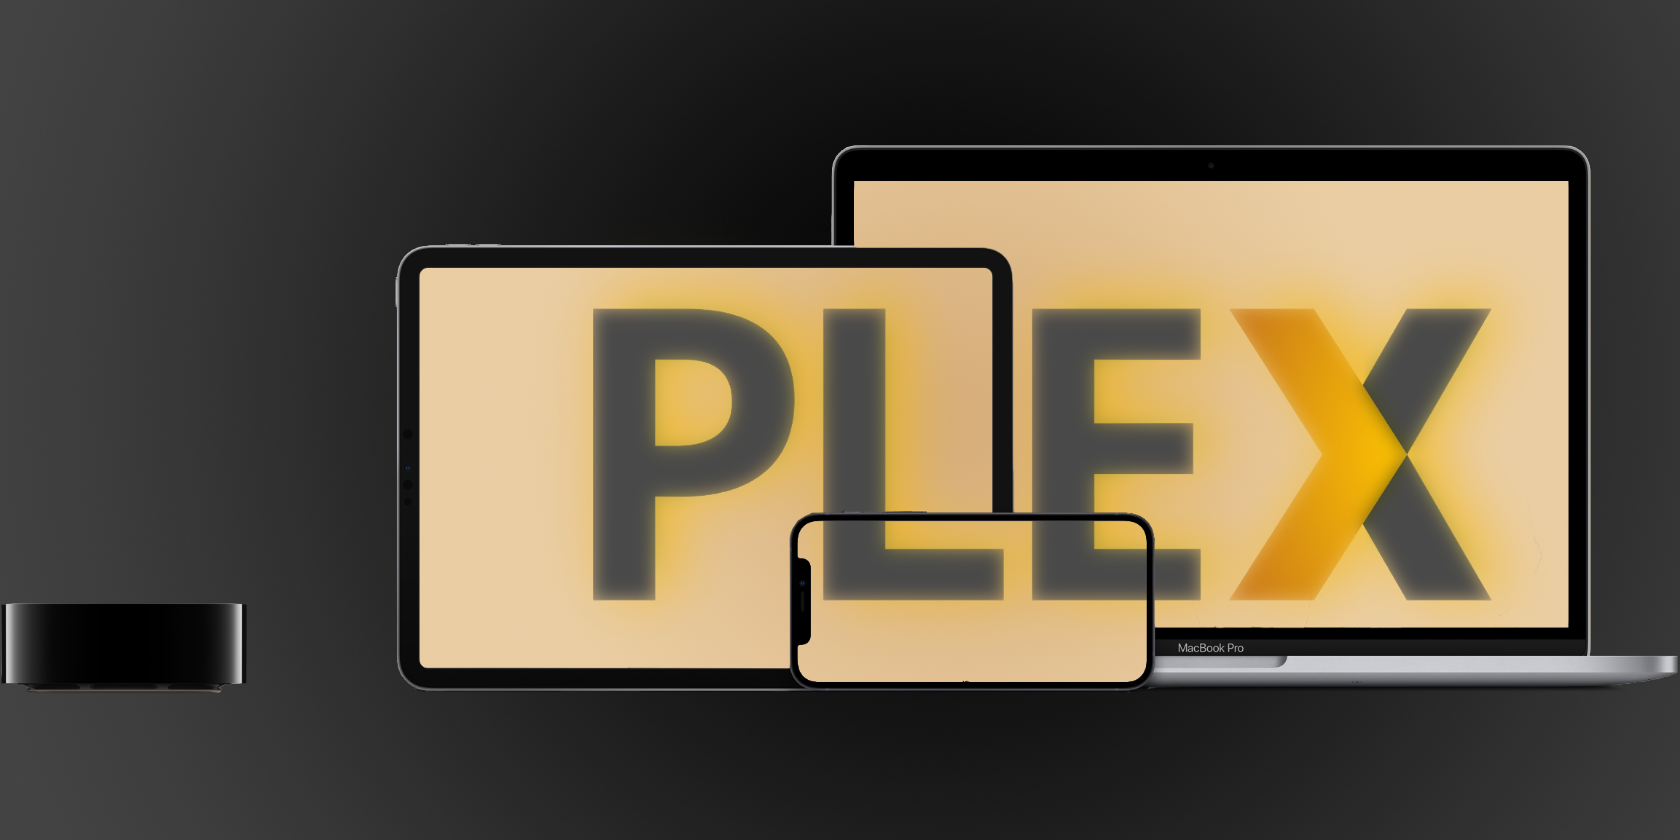 An illustration showing an iPhone, iPad and MacBook Pro displaying the Plex logo next to an Apple TV